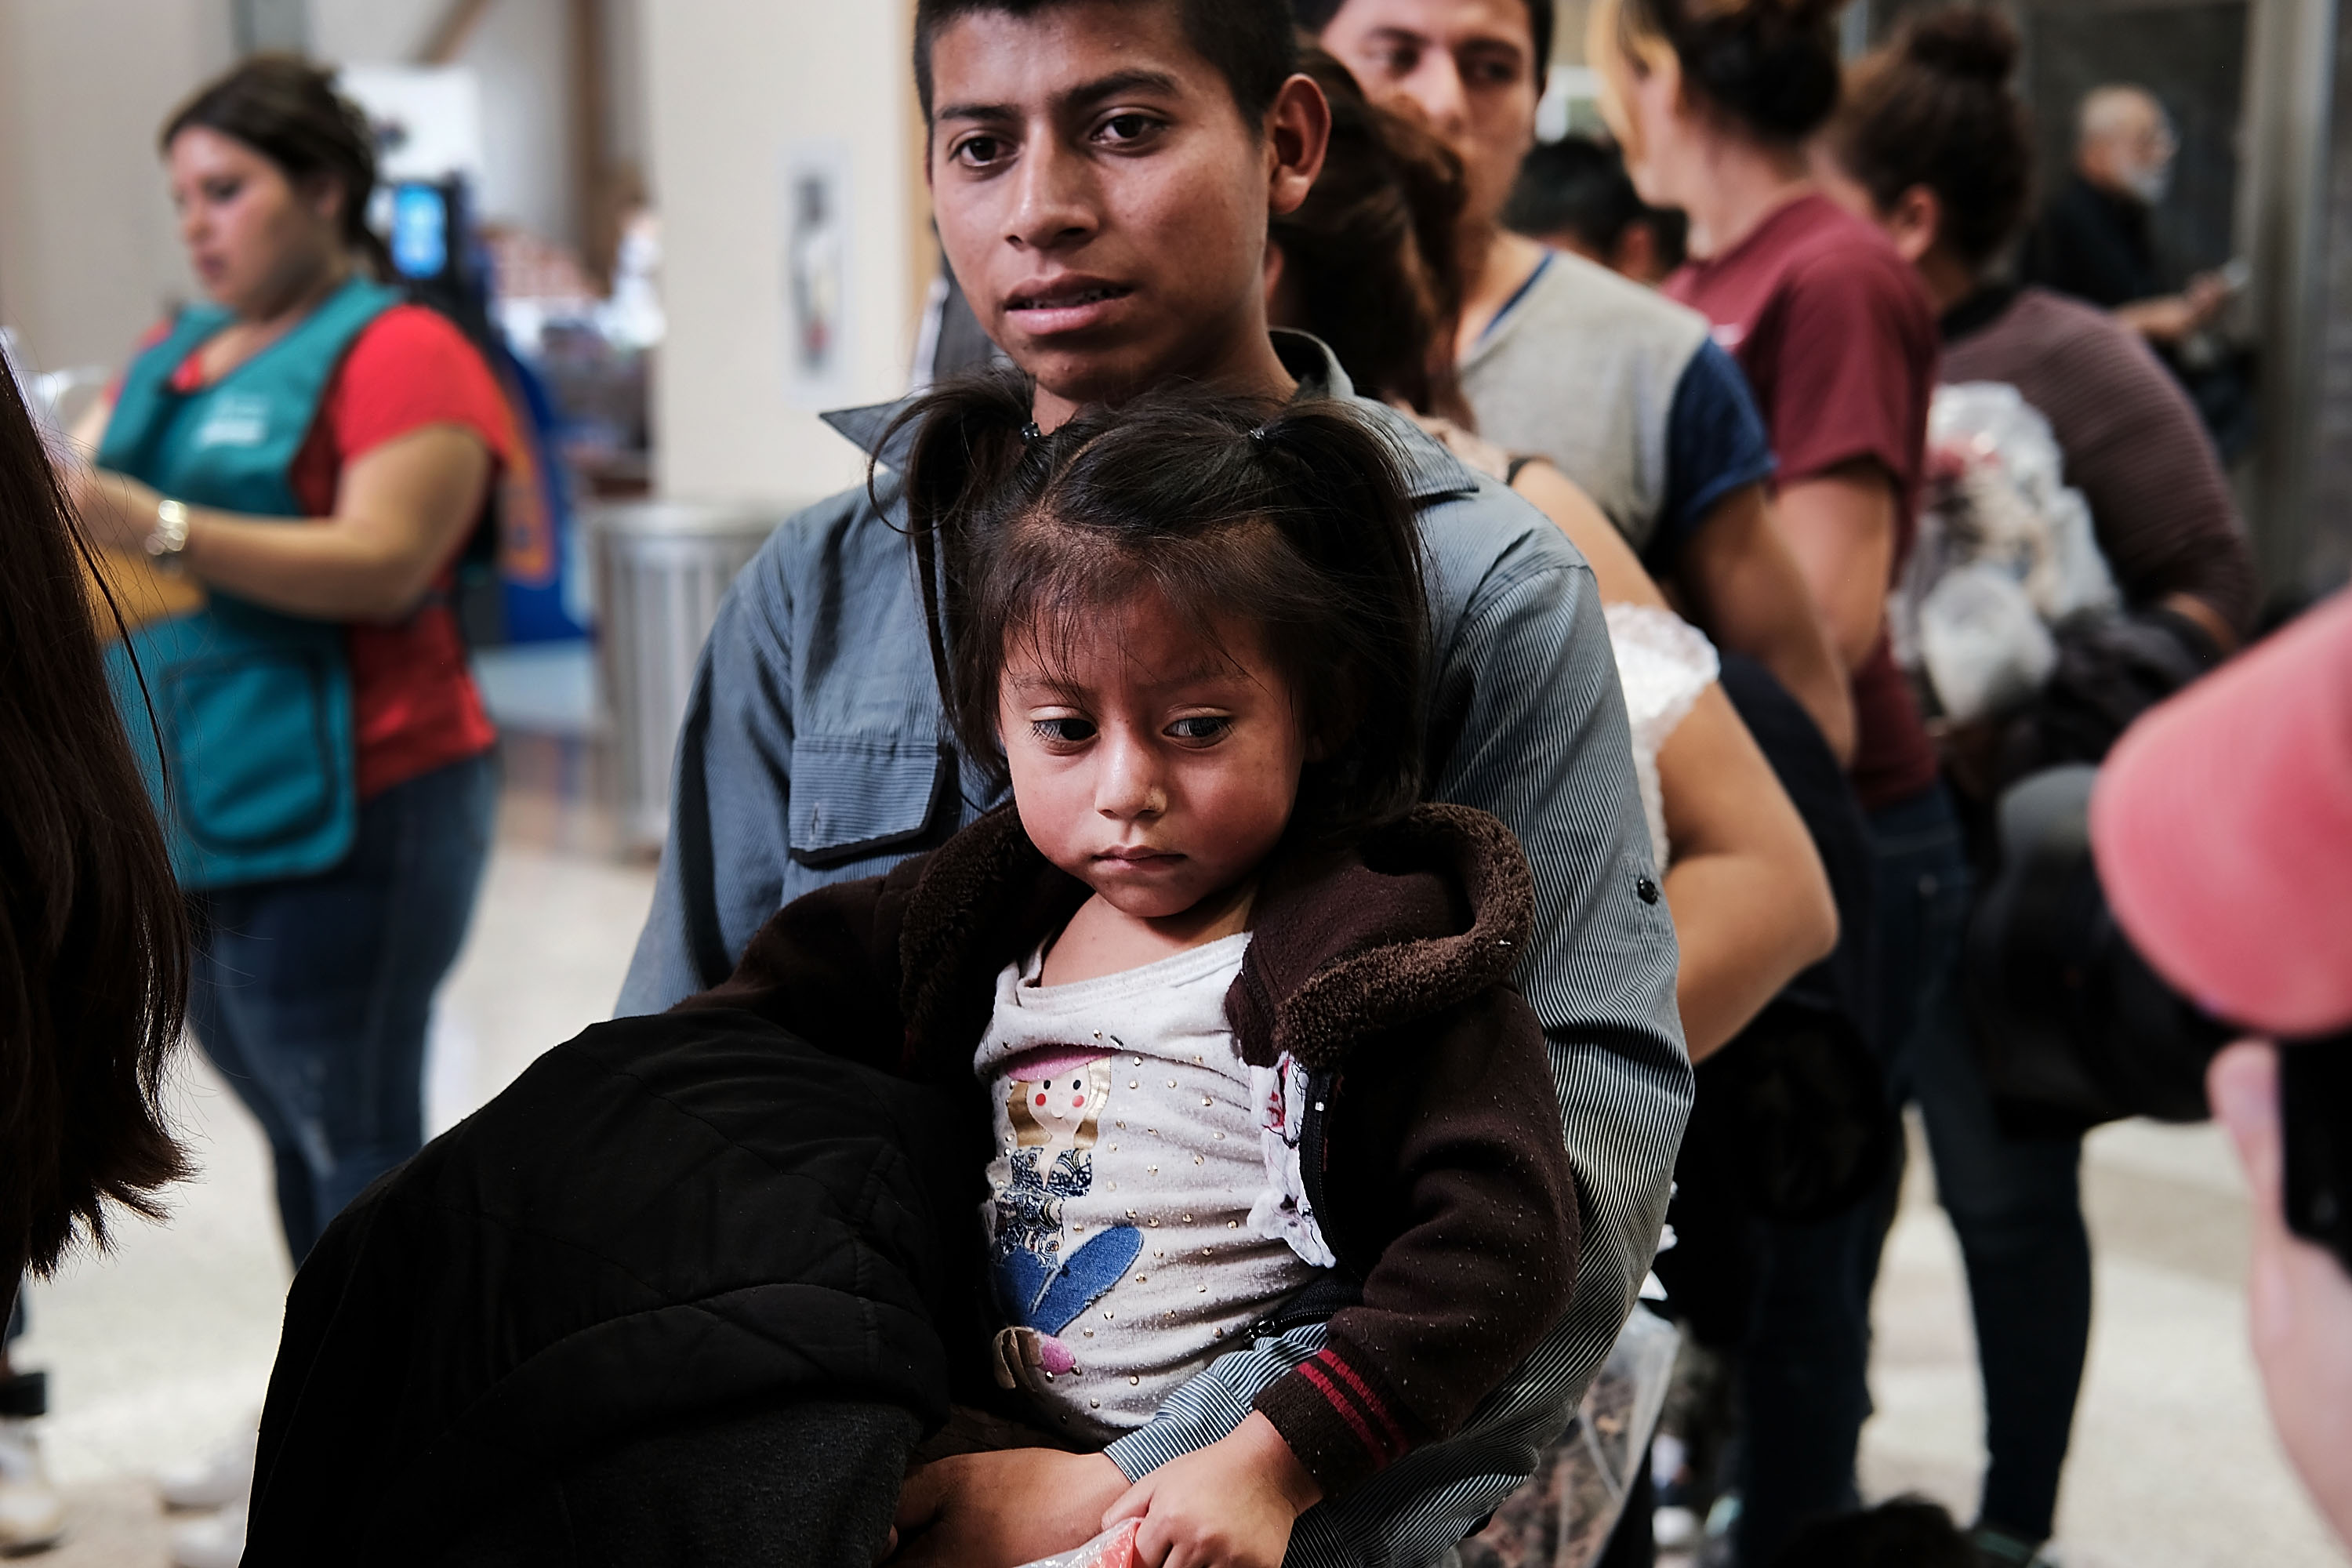 Dozens of women, men and their children, many fleeing poverty and violence in Honduras, Guatamala and El Salvador, arrive at a bus station following release from Customs and Border Protection